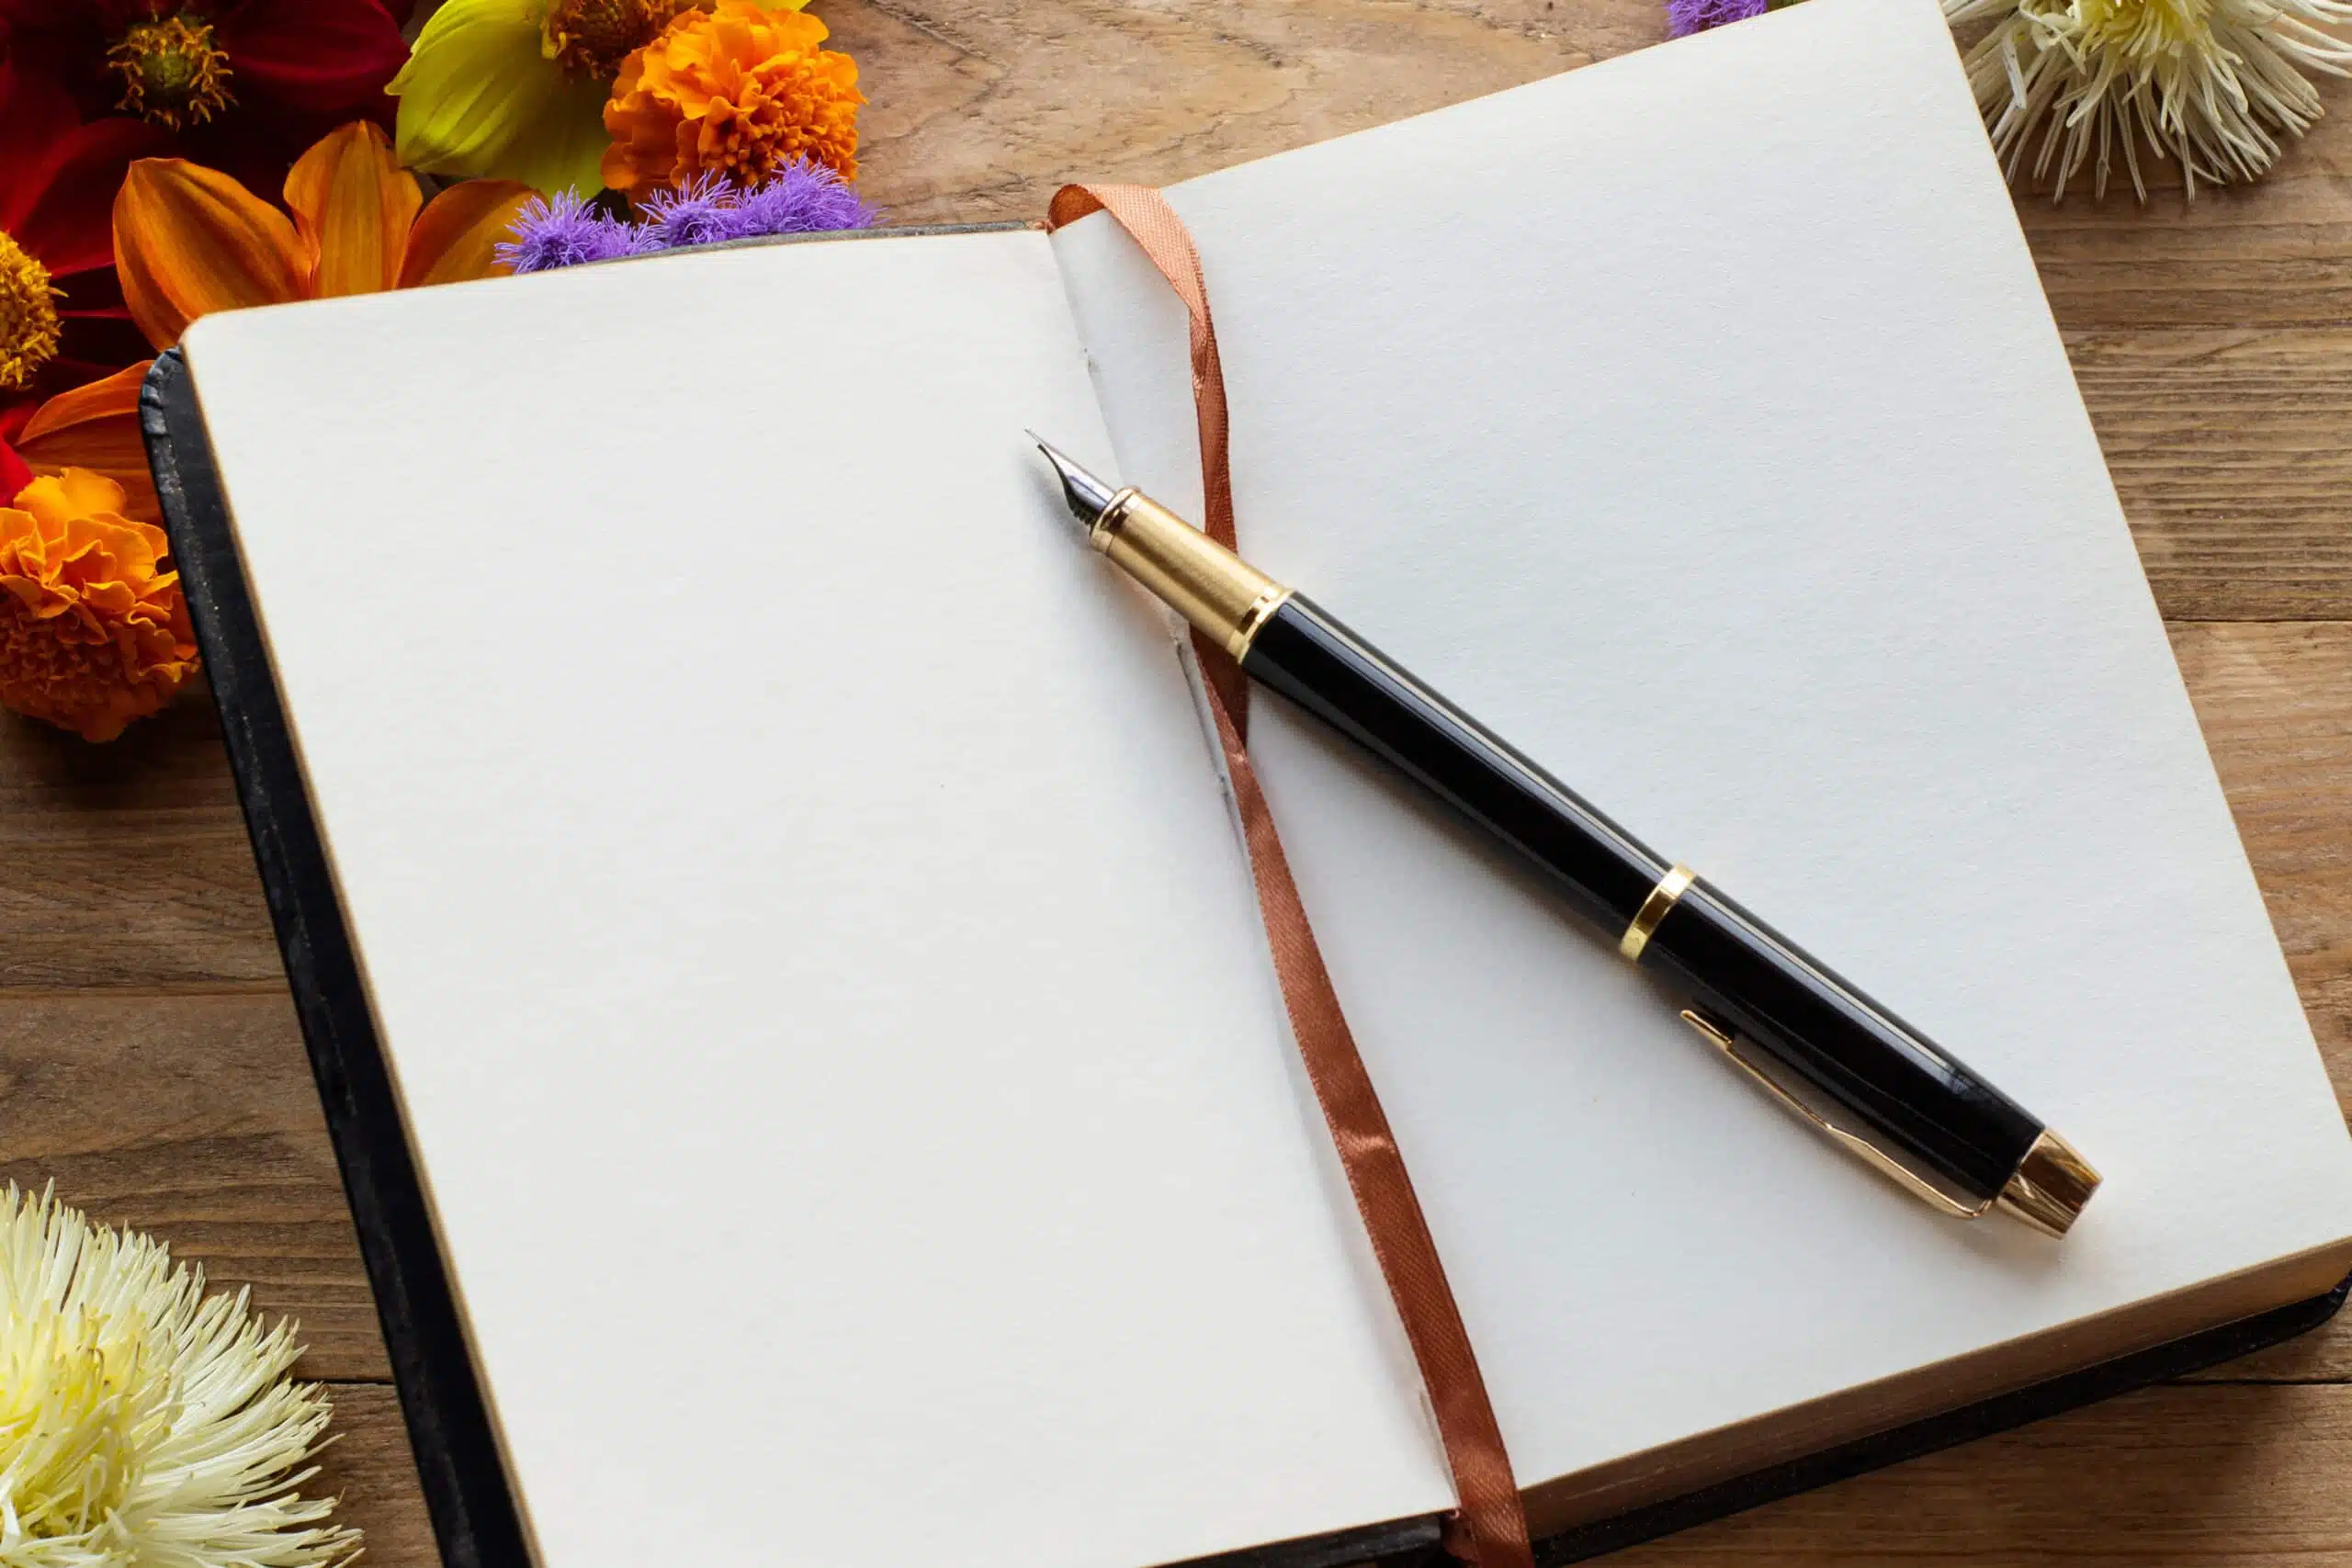 Floral arrangement on a wooden background with an open notebook and fountain pen.